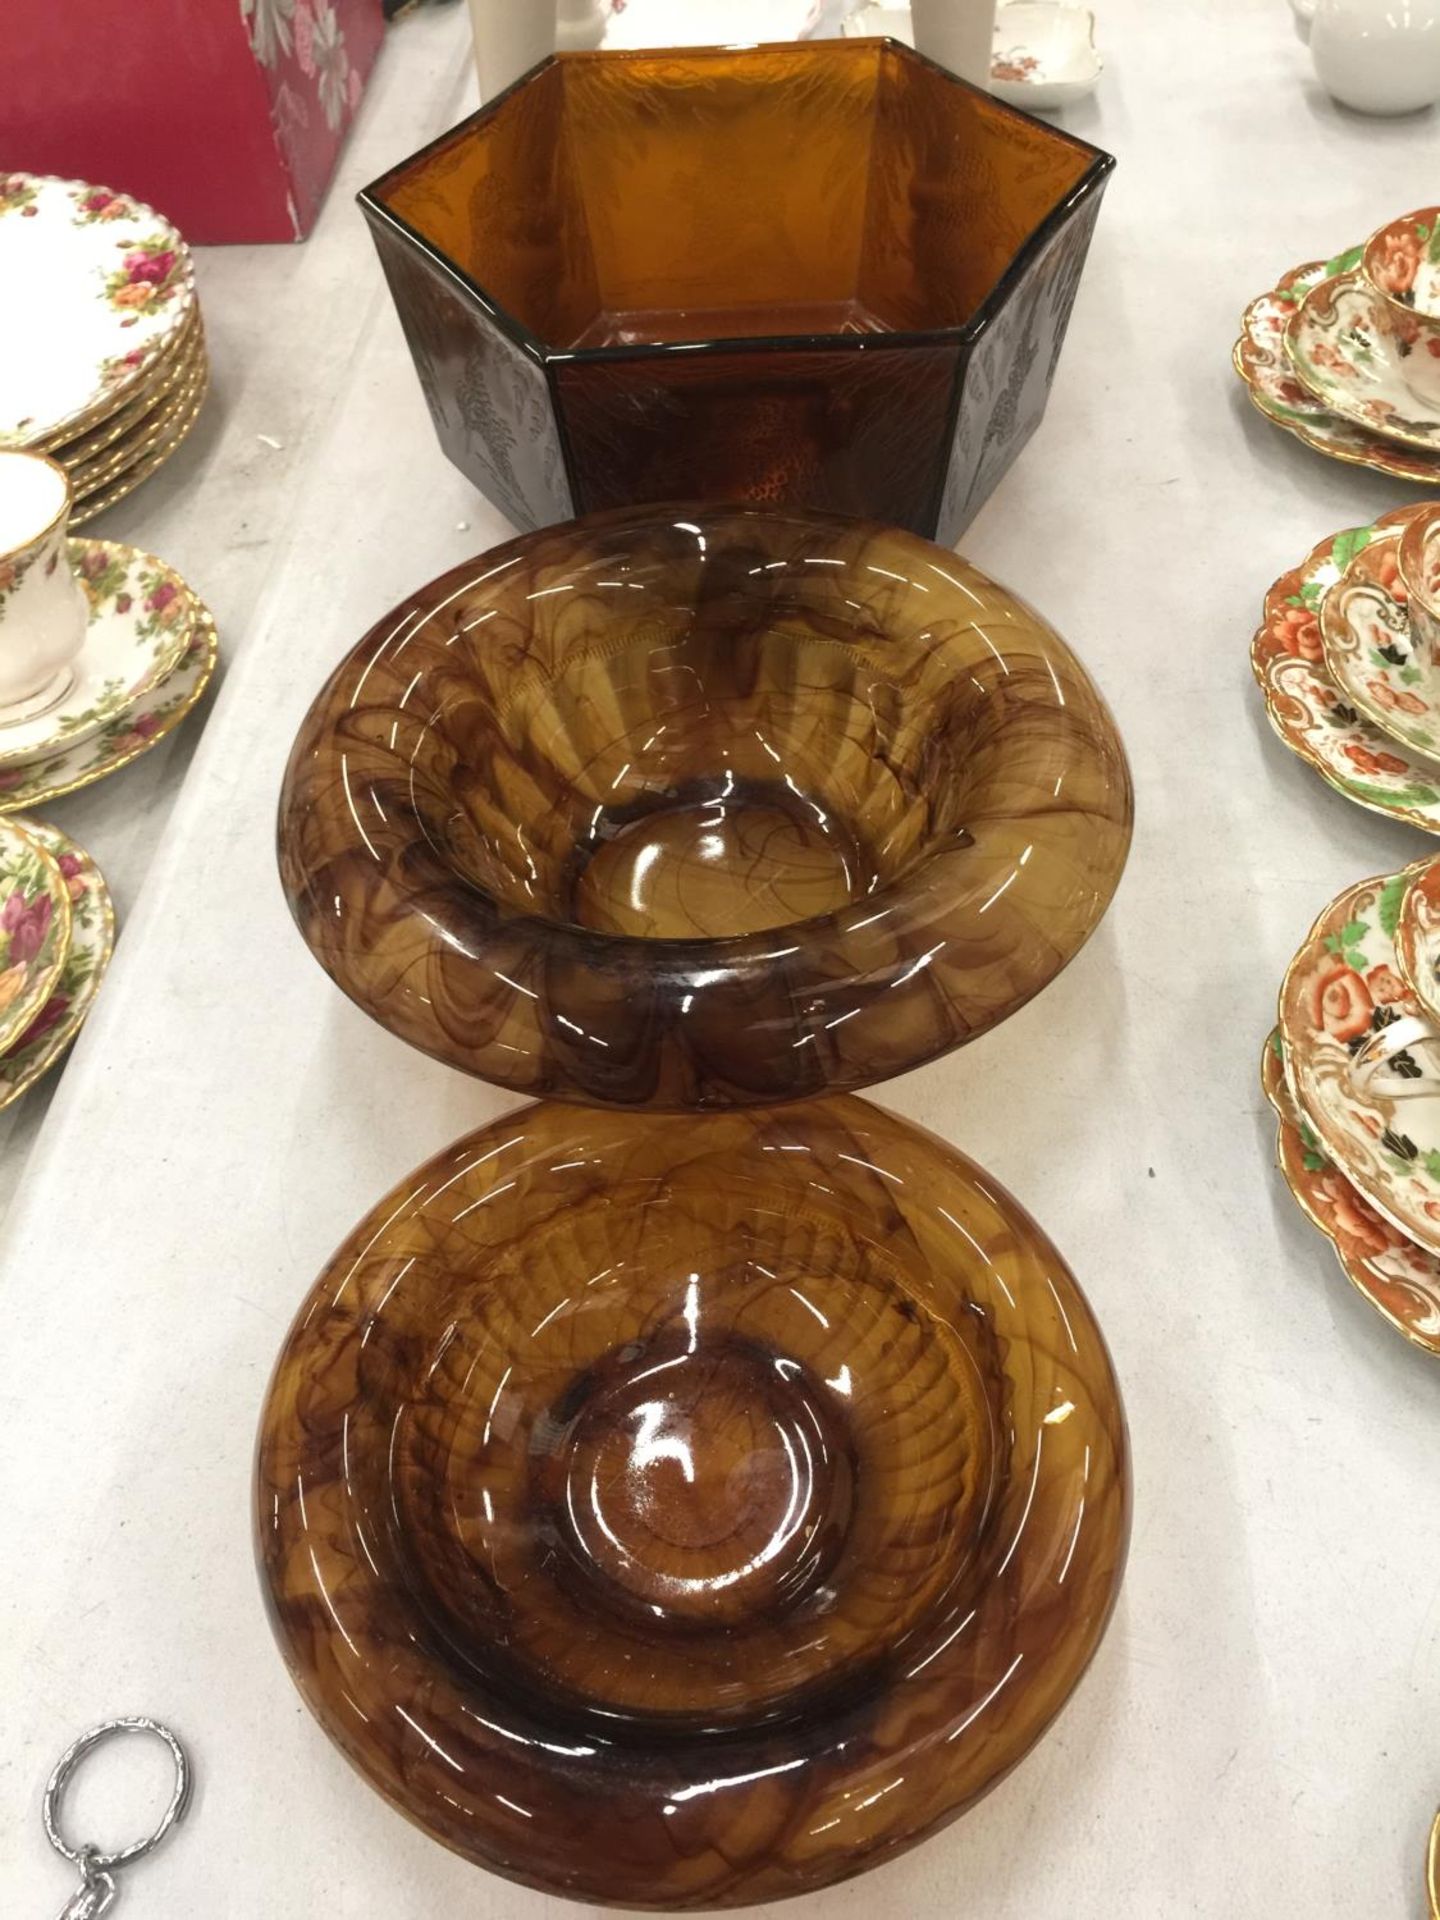 THREE AMBER CLOUD GLASSWARE BOWLS TO INCLUDE ONE WITH EMBOSSED KINGFISHERS - Image 2 of 6